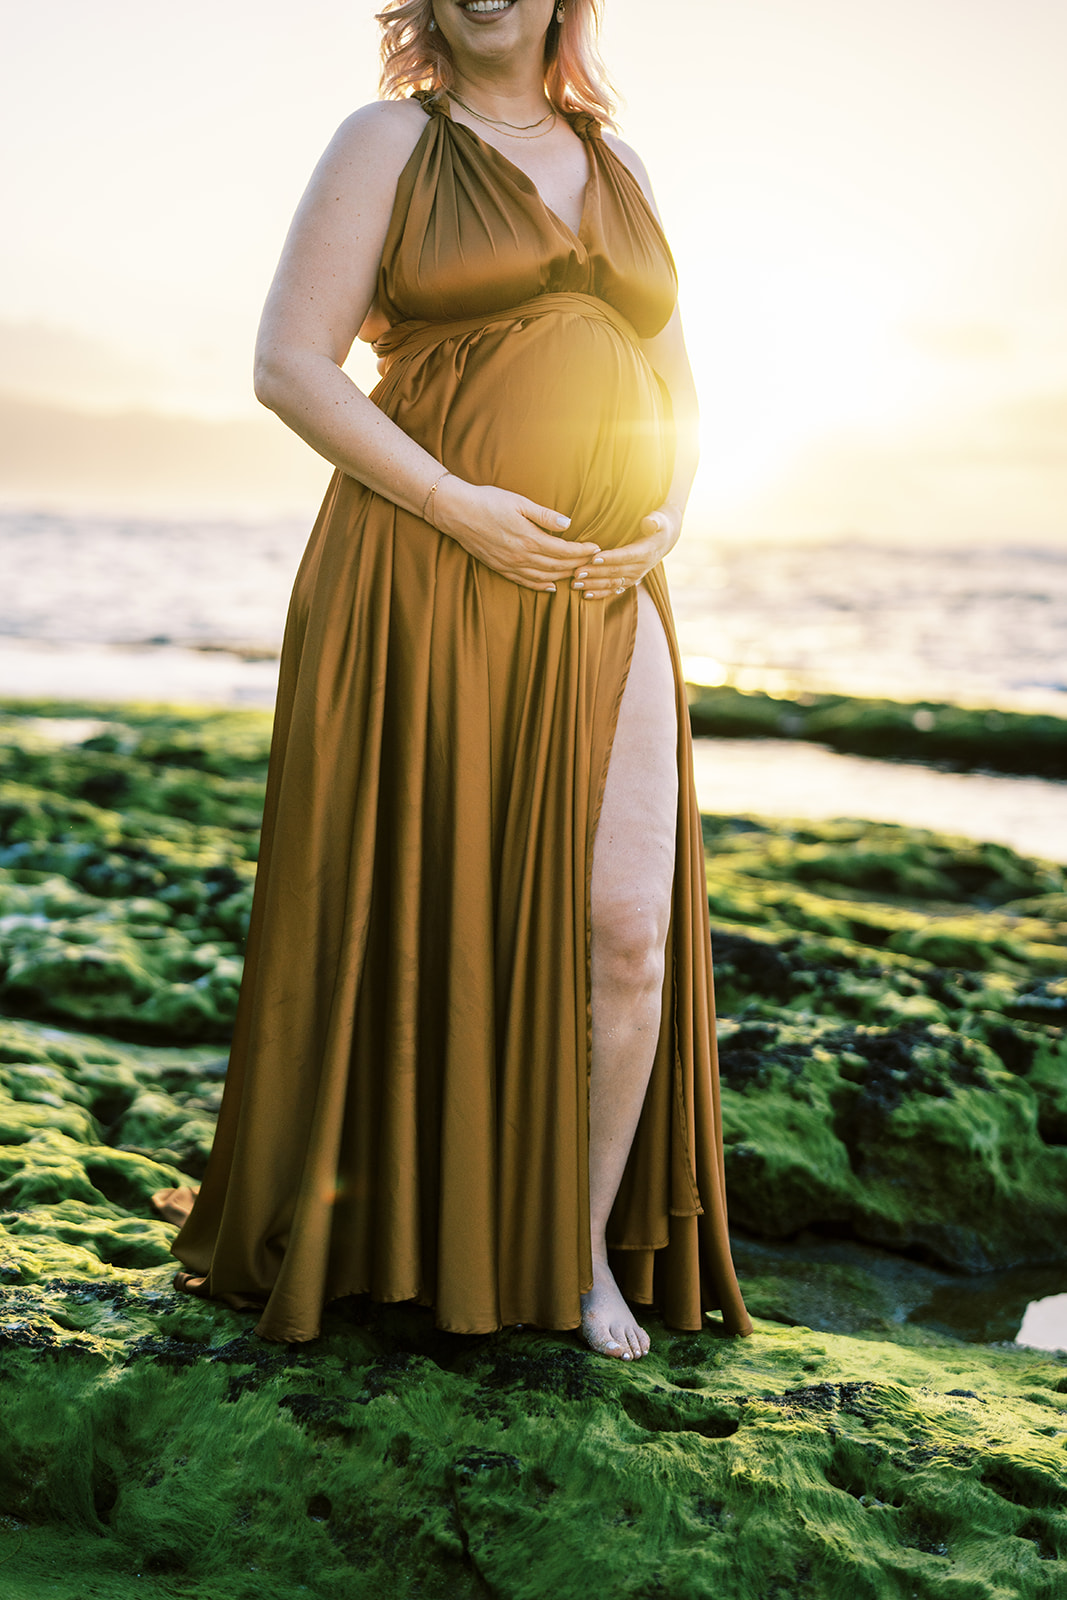 Pregnant woman standing on a rocky beach at sunset, cradling her belly during sunset Maternity Session on Oahu